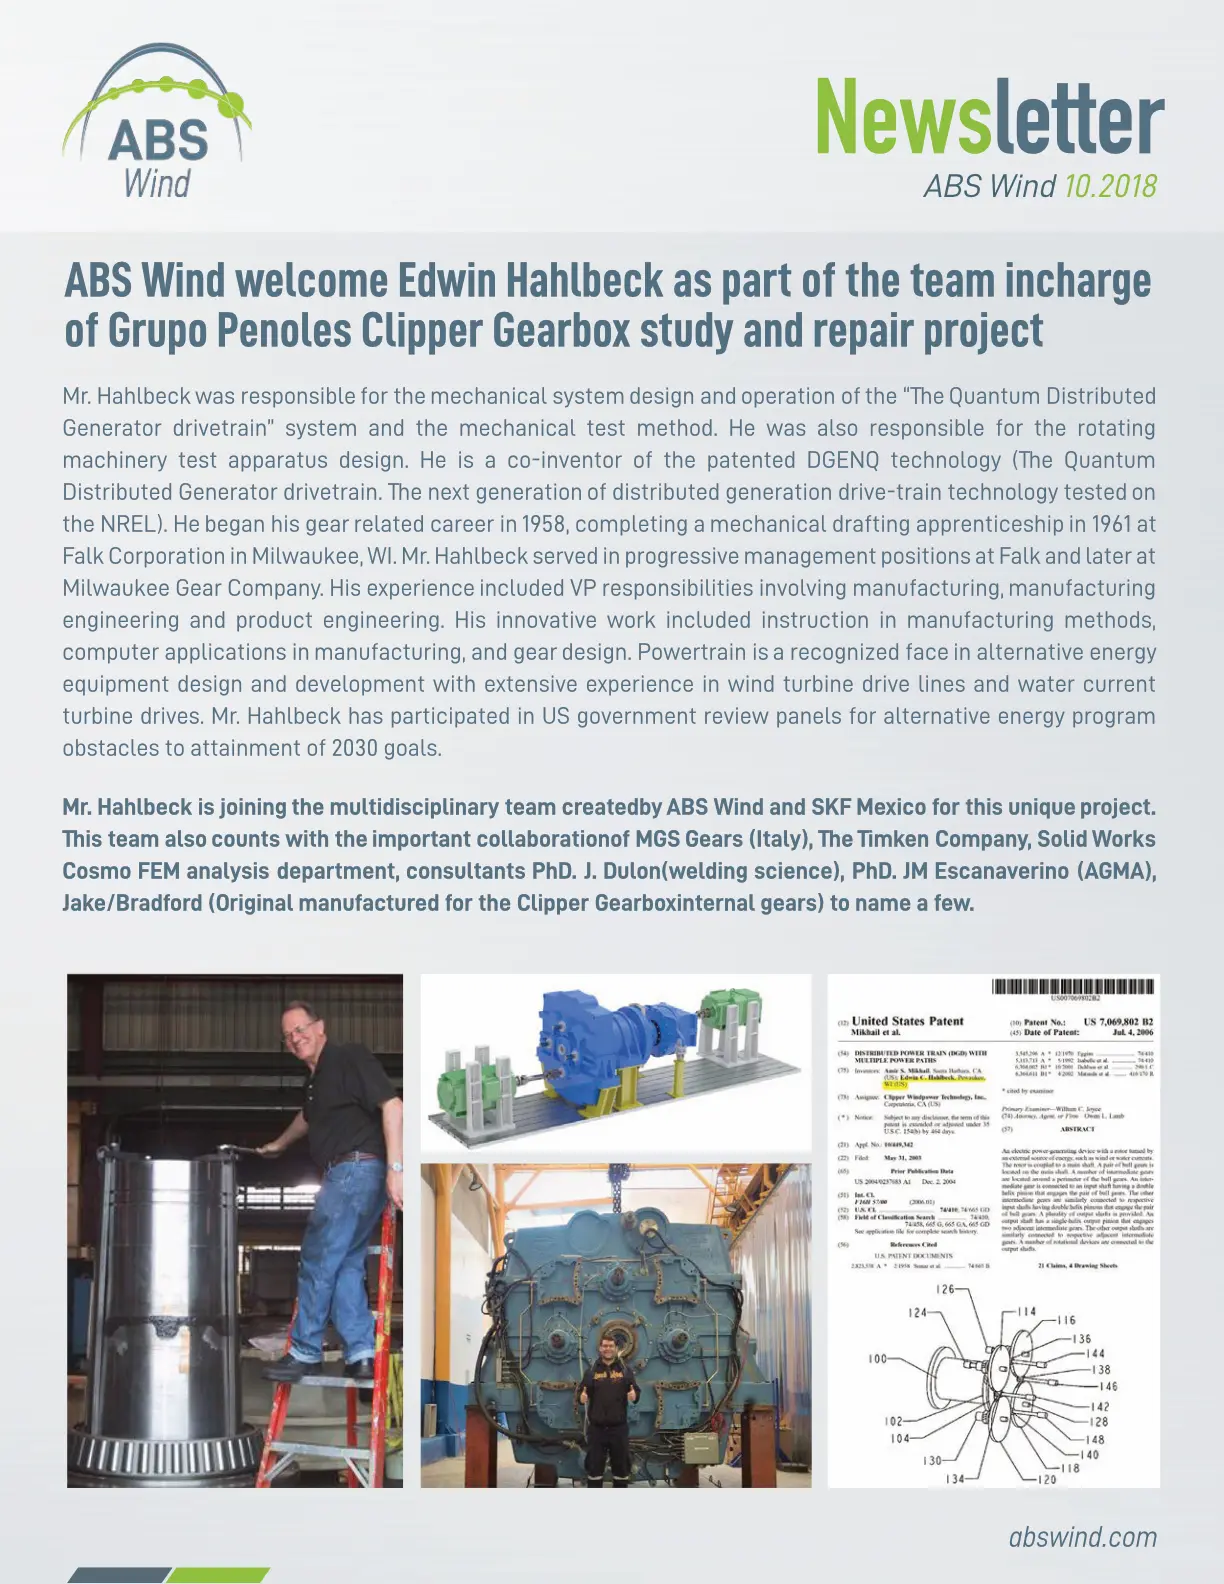 ABS Wind Division has the honor to welcome Mr. Edwin Hahlbeck as part of the team in charge of Grupo Penoles Clipper Gearbox study and repair project.